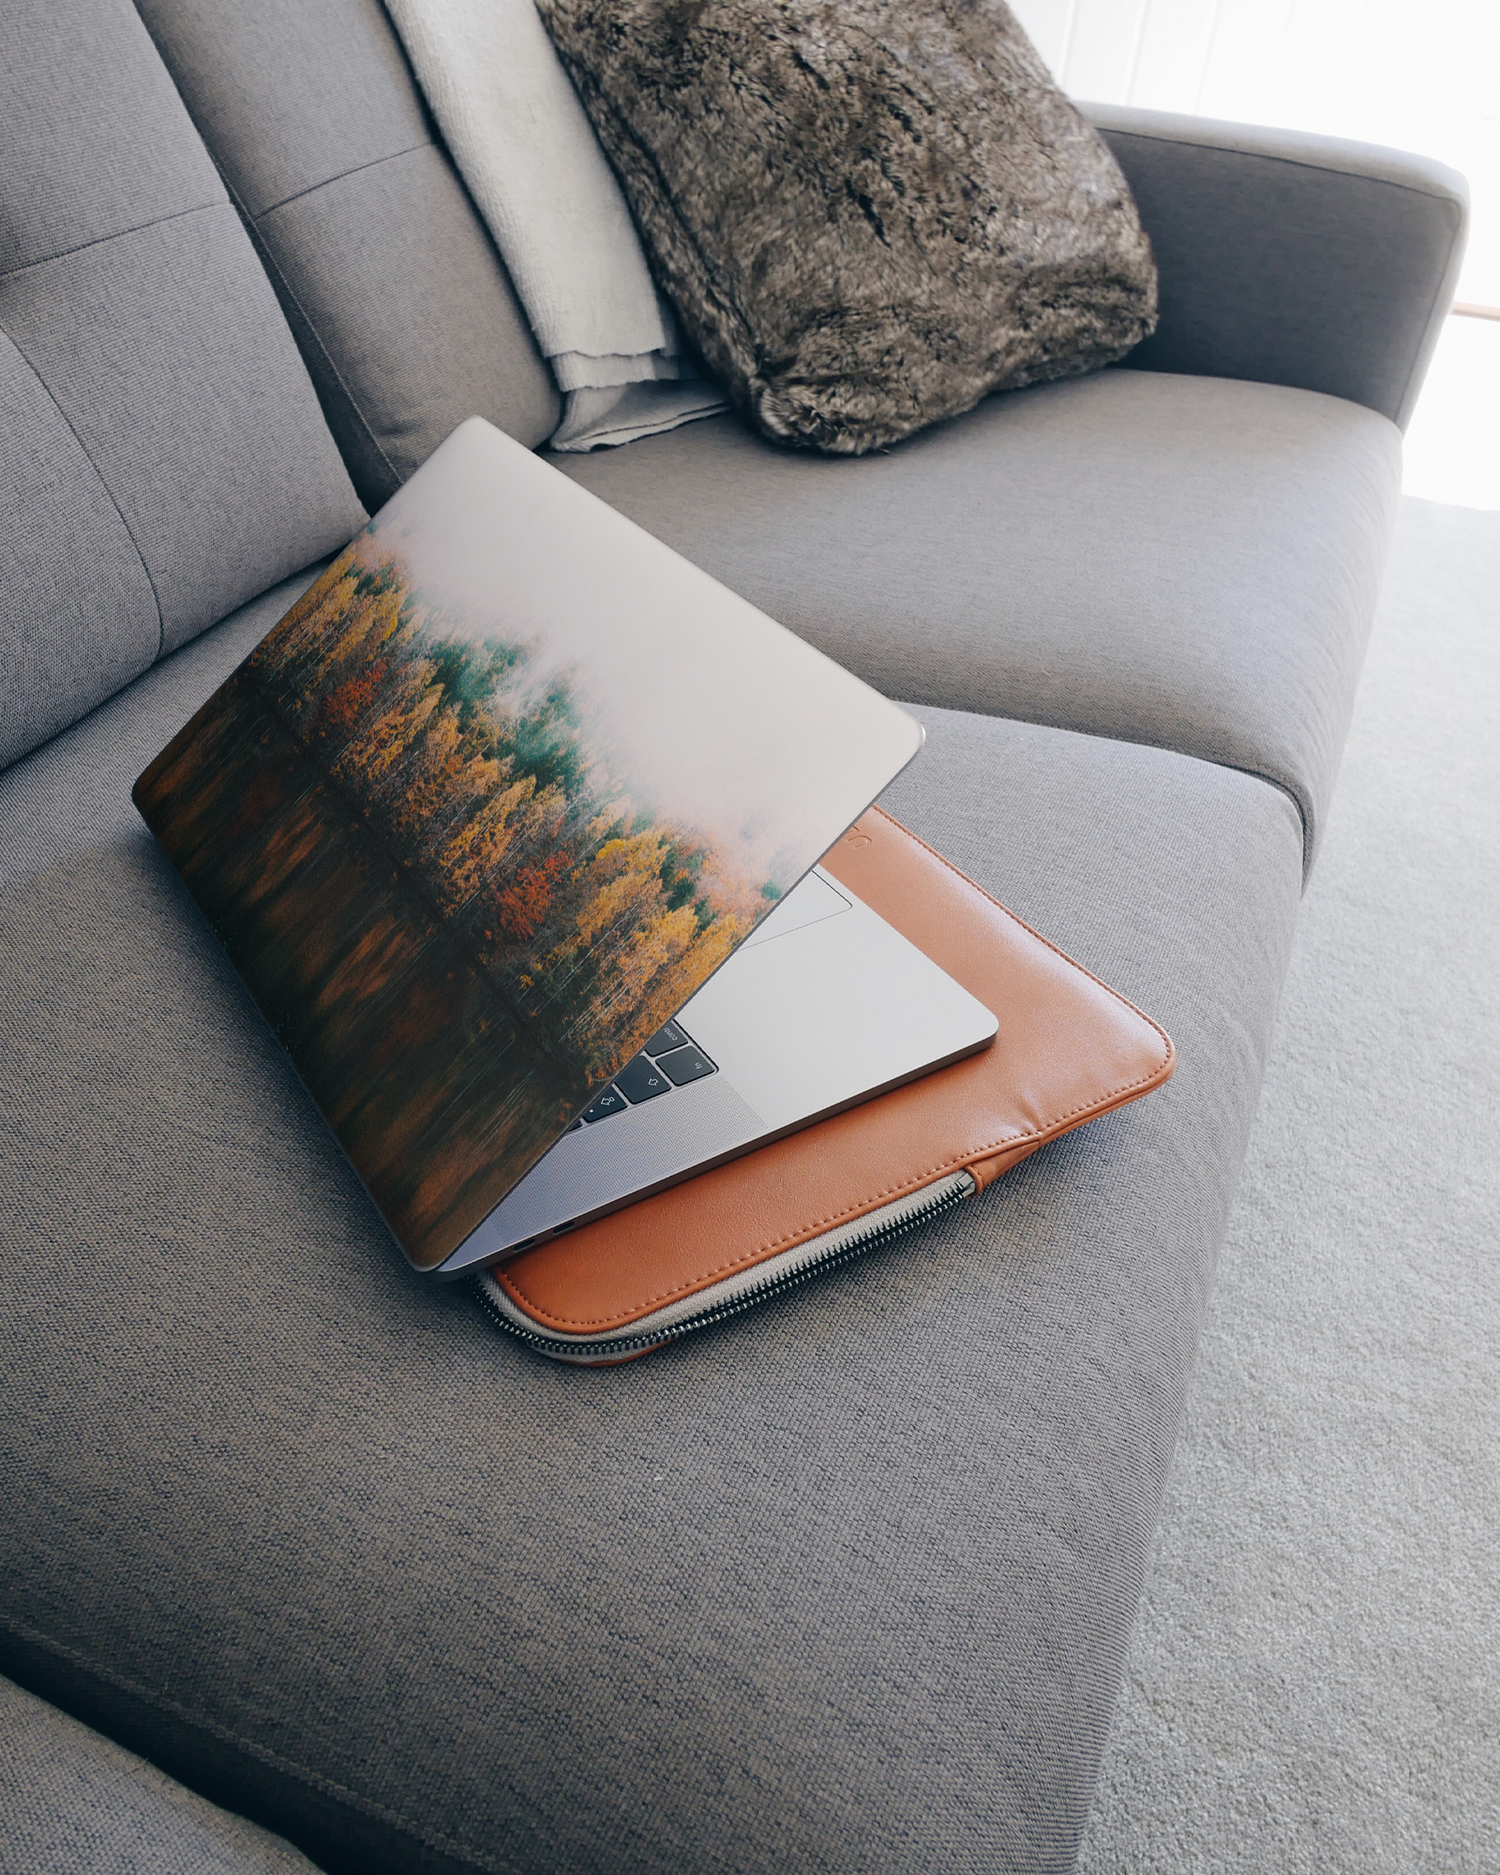 Fall Fog Laptop Skin for 15 inch Apple MacBooks on a couch